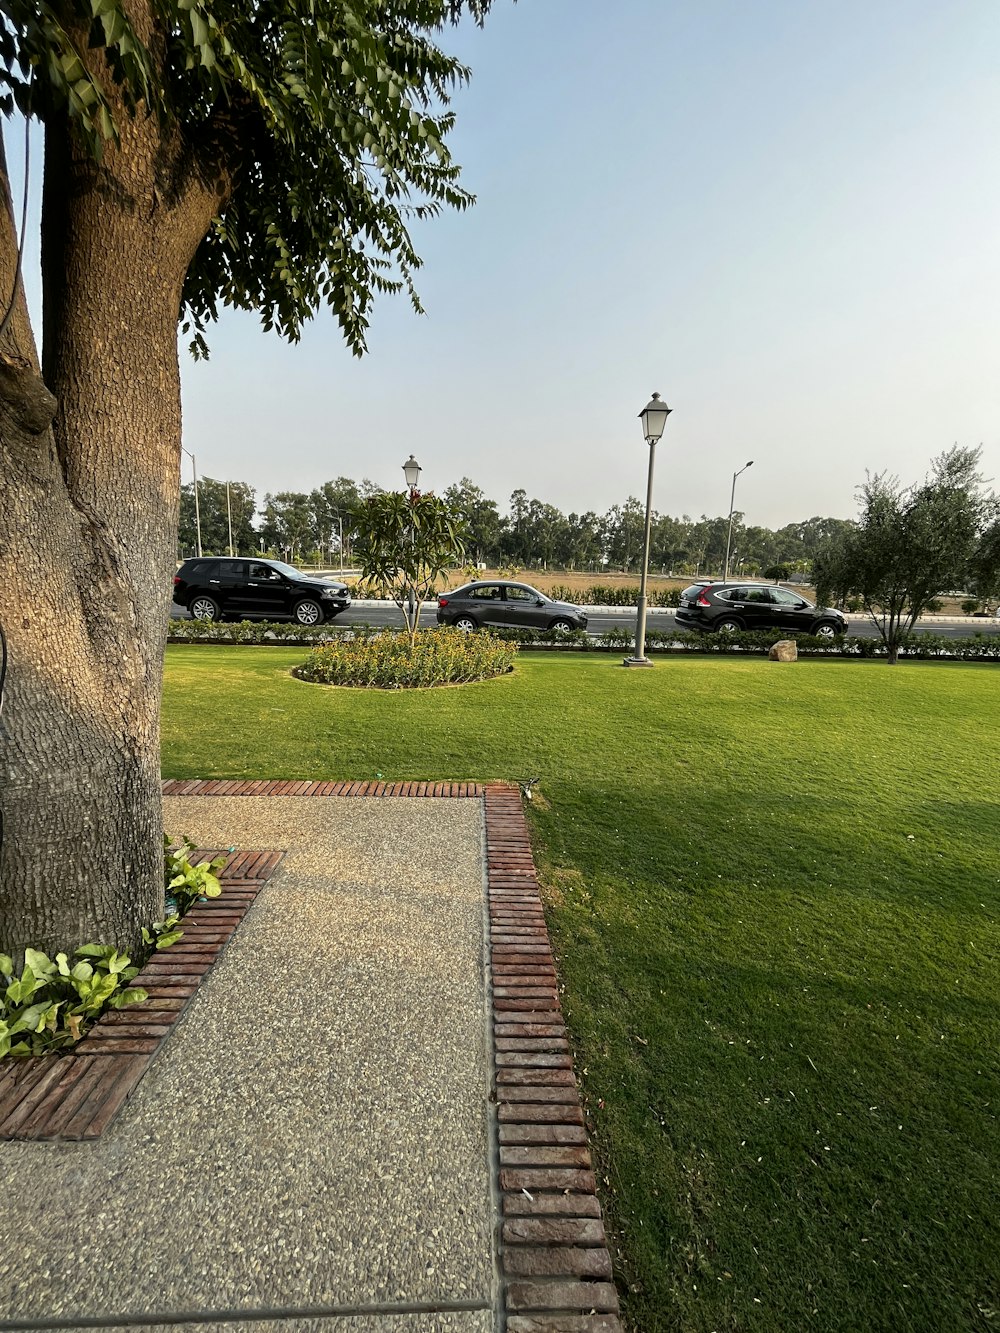 a park with cars parked in the background